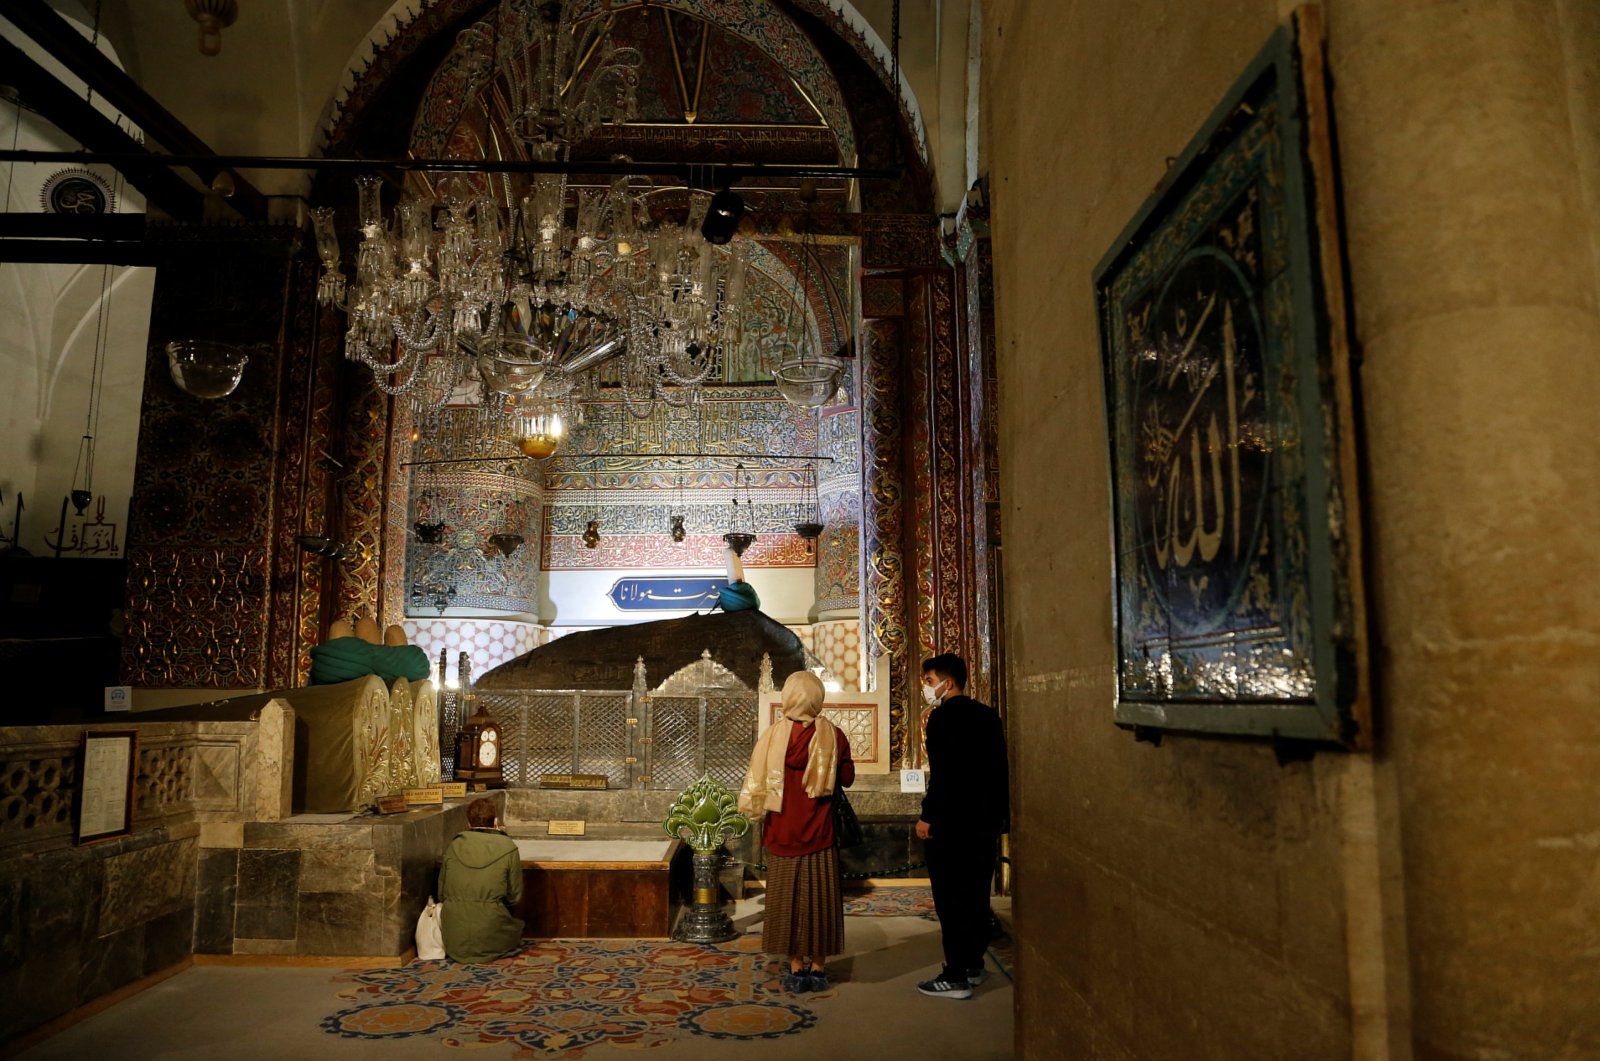 People visit the 15th century Selimiye Mosque with the tomb of Mevlana Jalaladdin Rumi, founder of Sufi Islam, in Konya, Turkey, Dec. 7, 2021. (Reuters Photo)